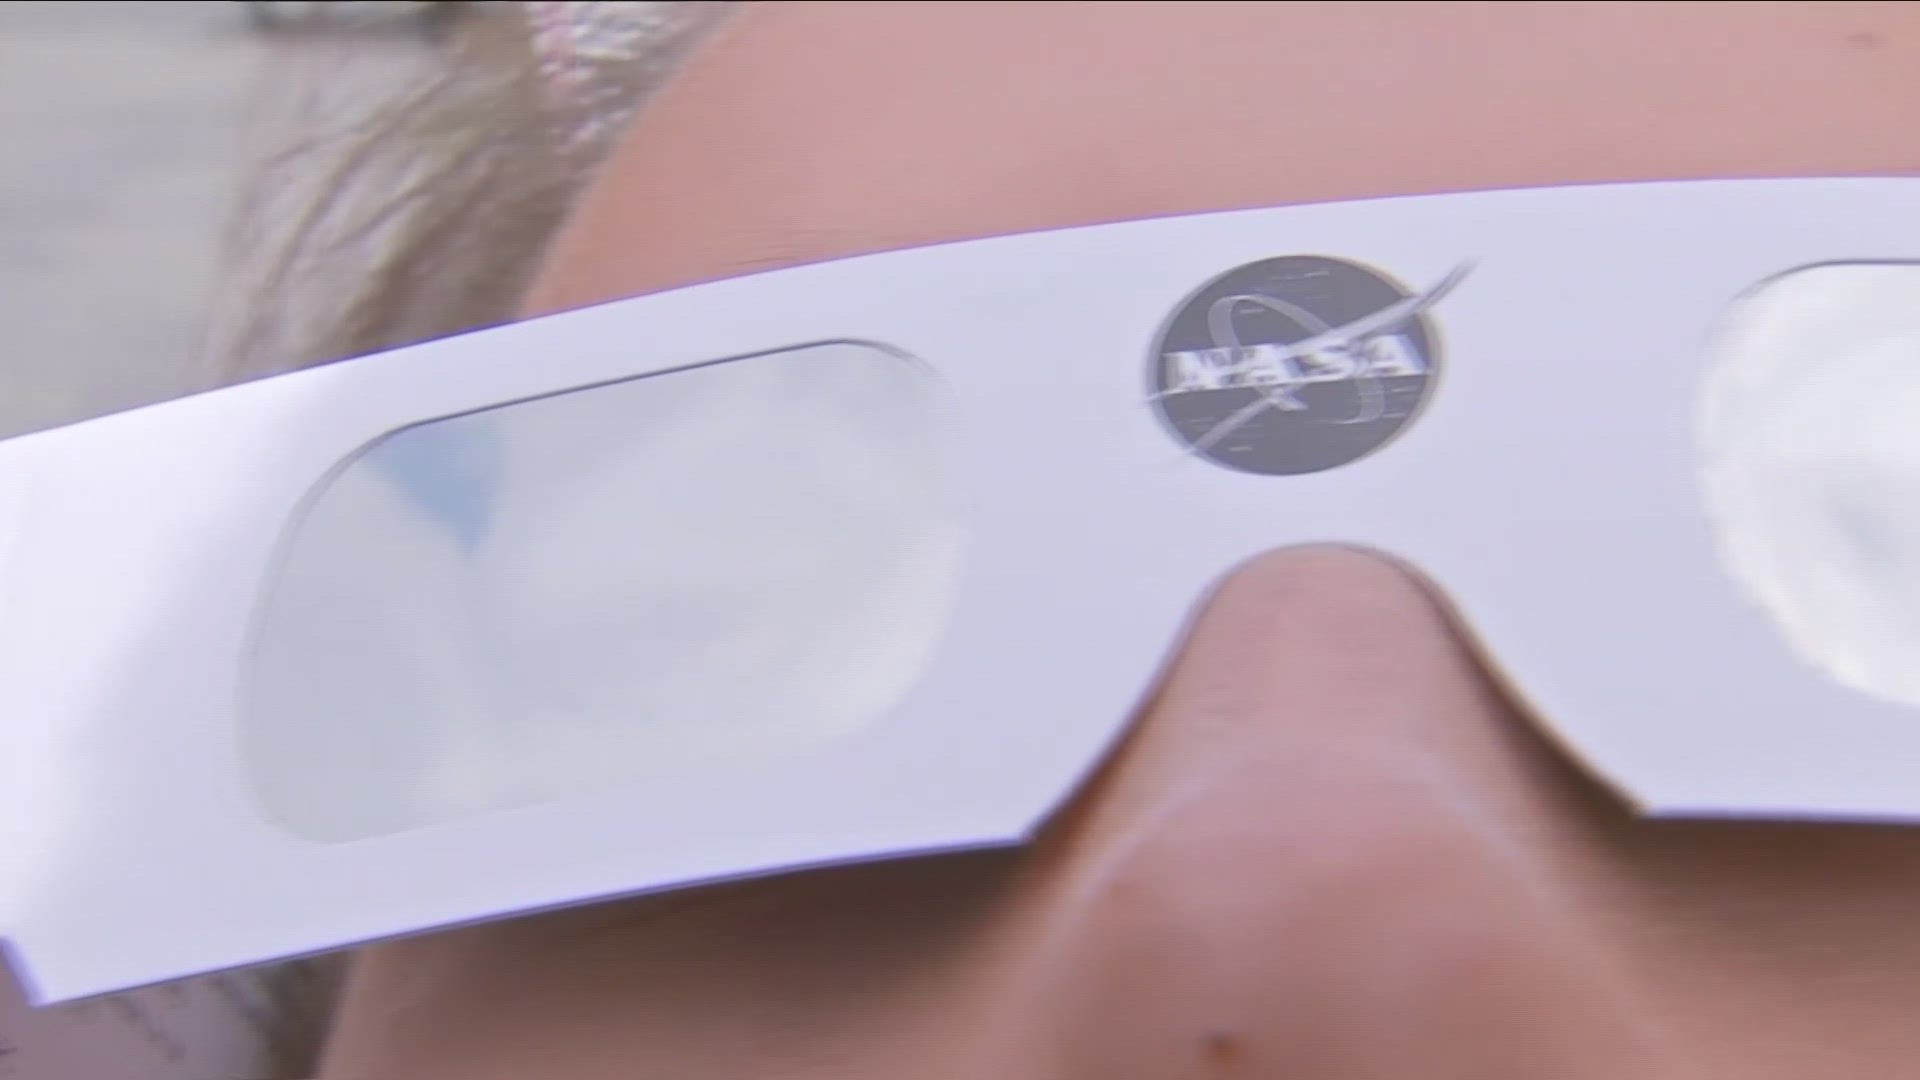 Buffalo State University shares plans for total solar eclipse